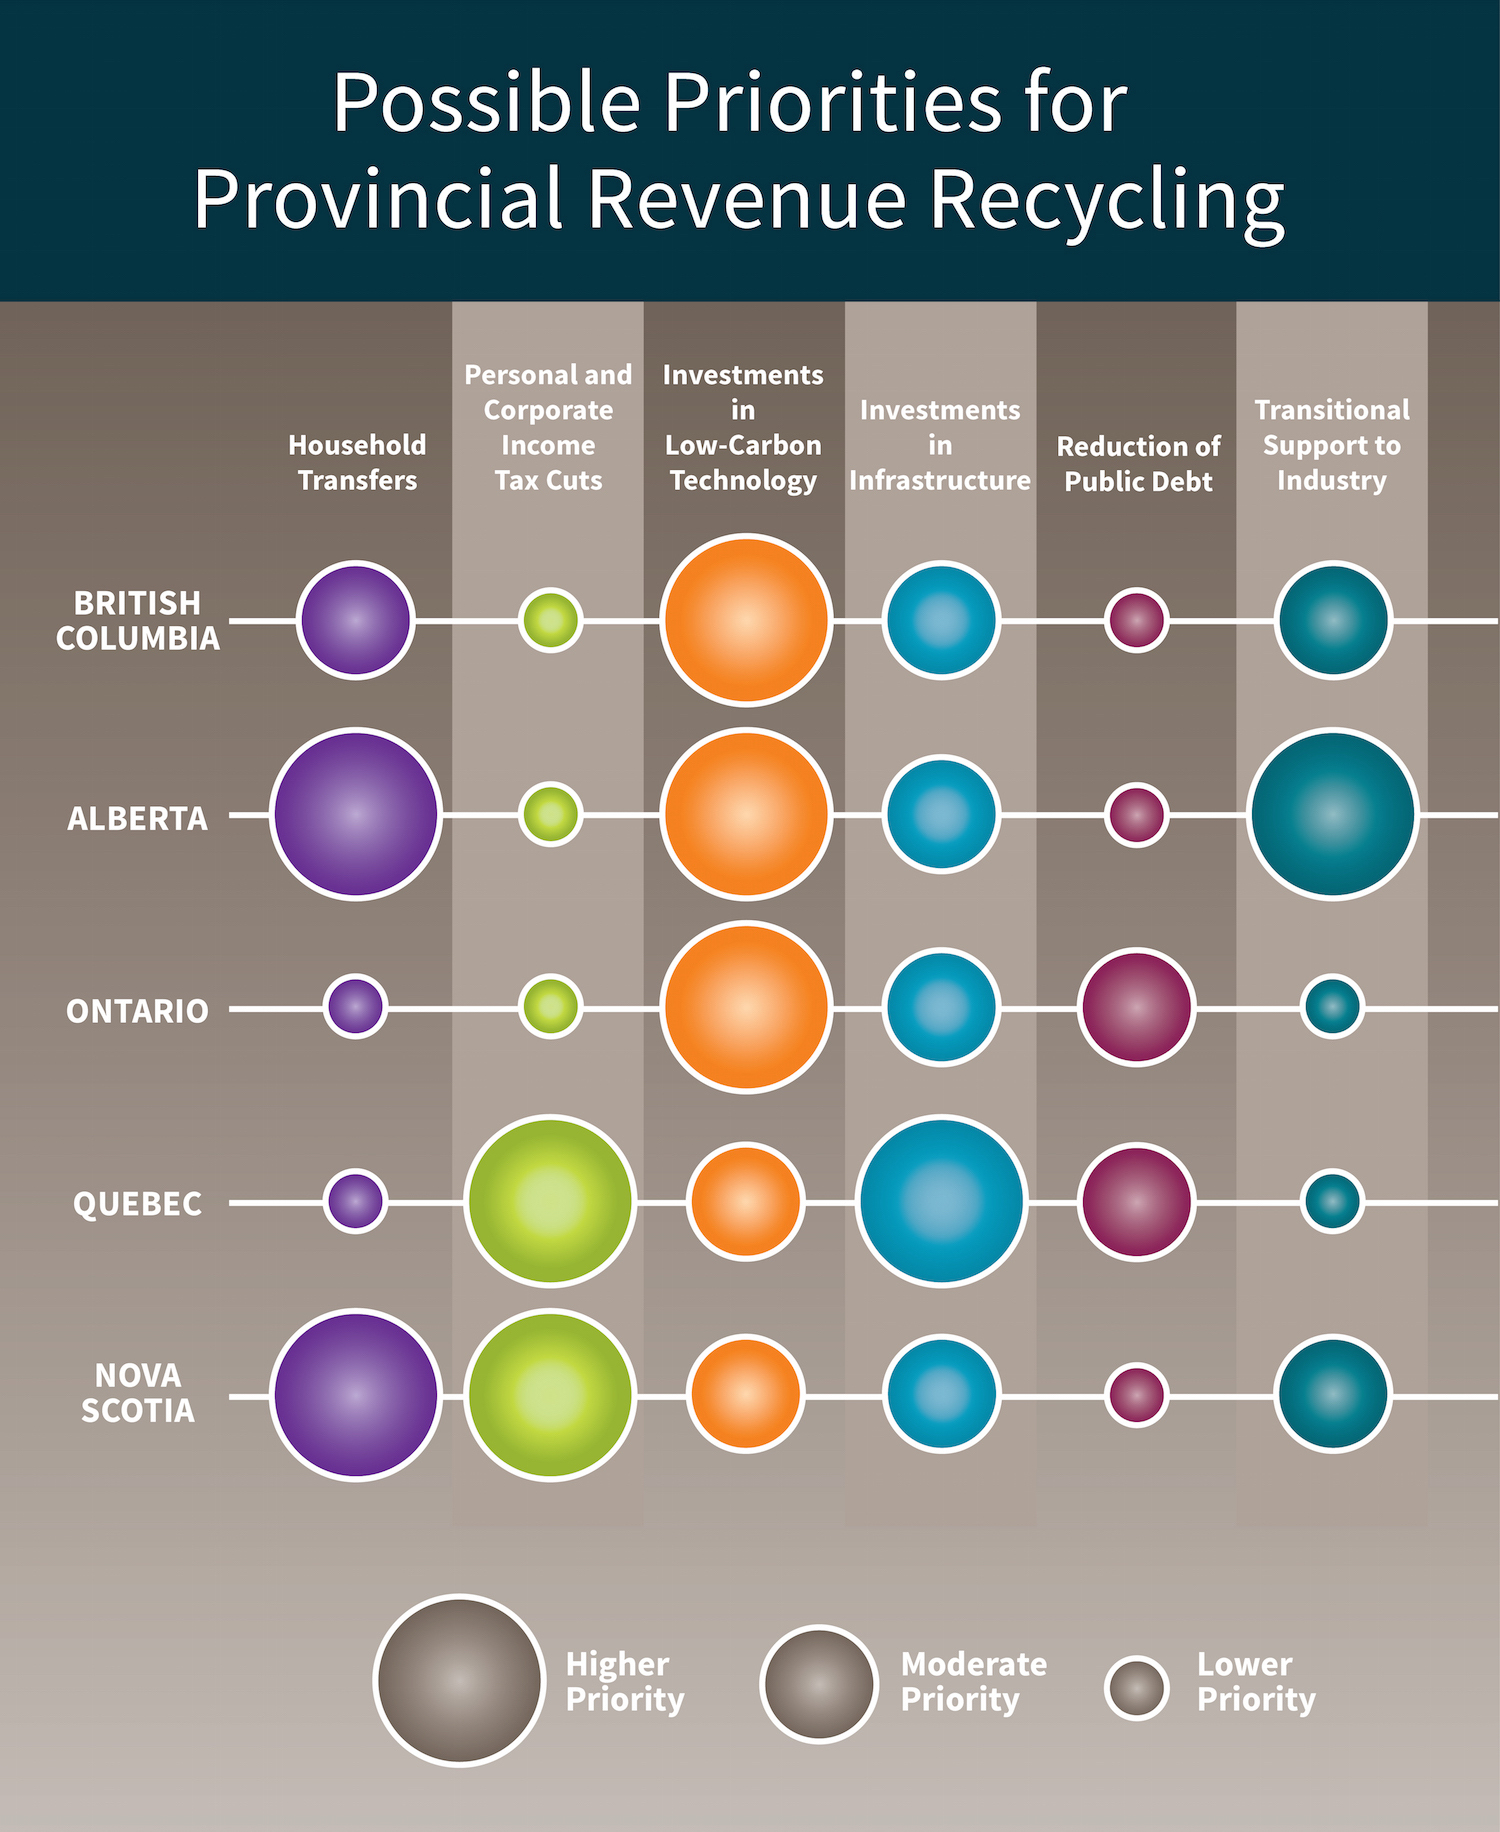 Possible Provincial Priorities for Revenue Recycling